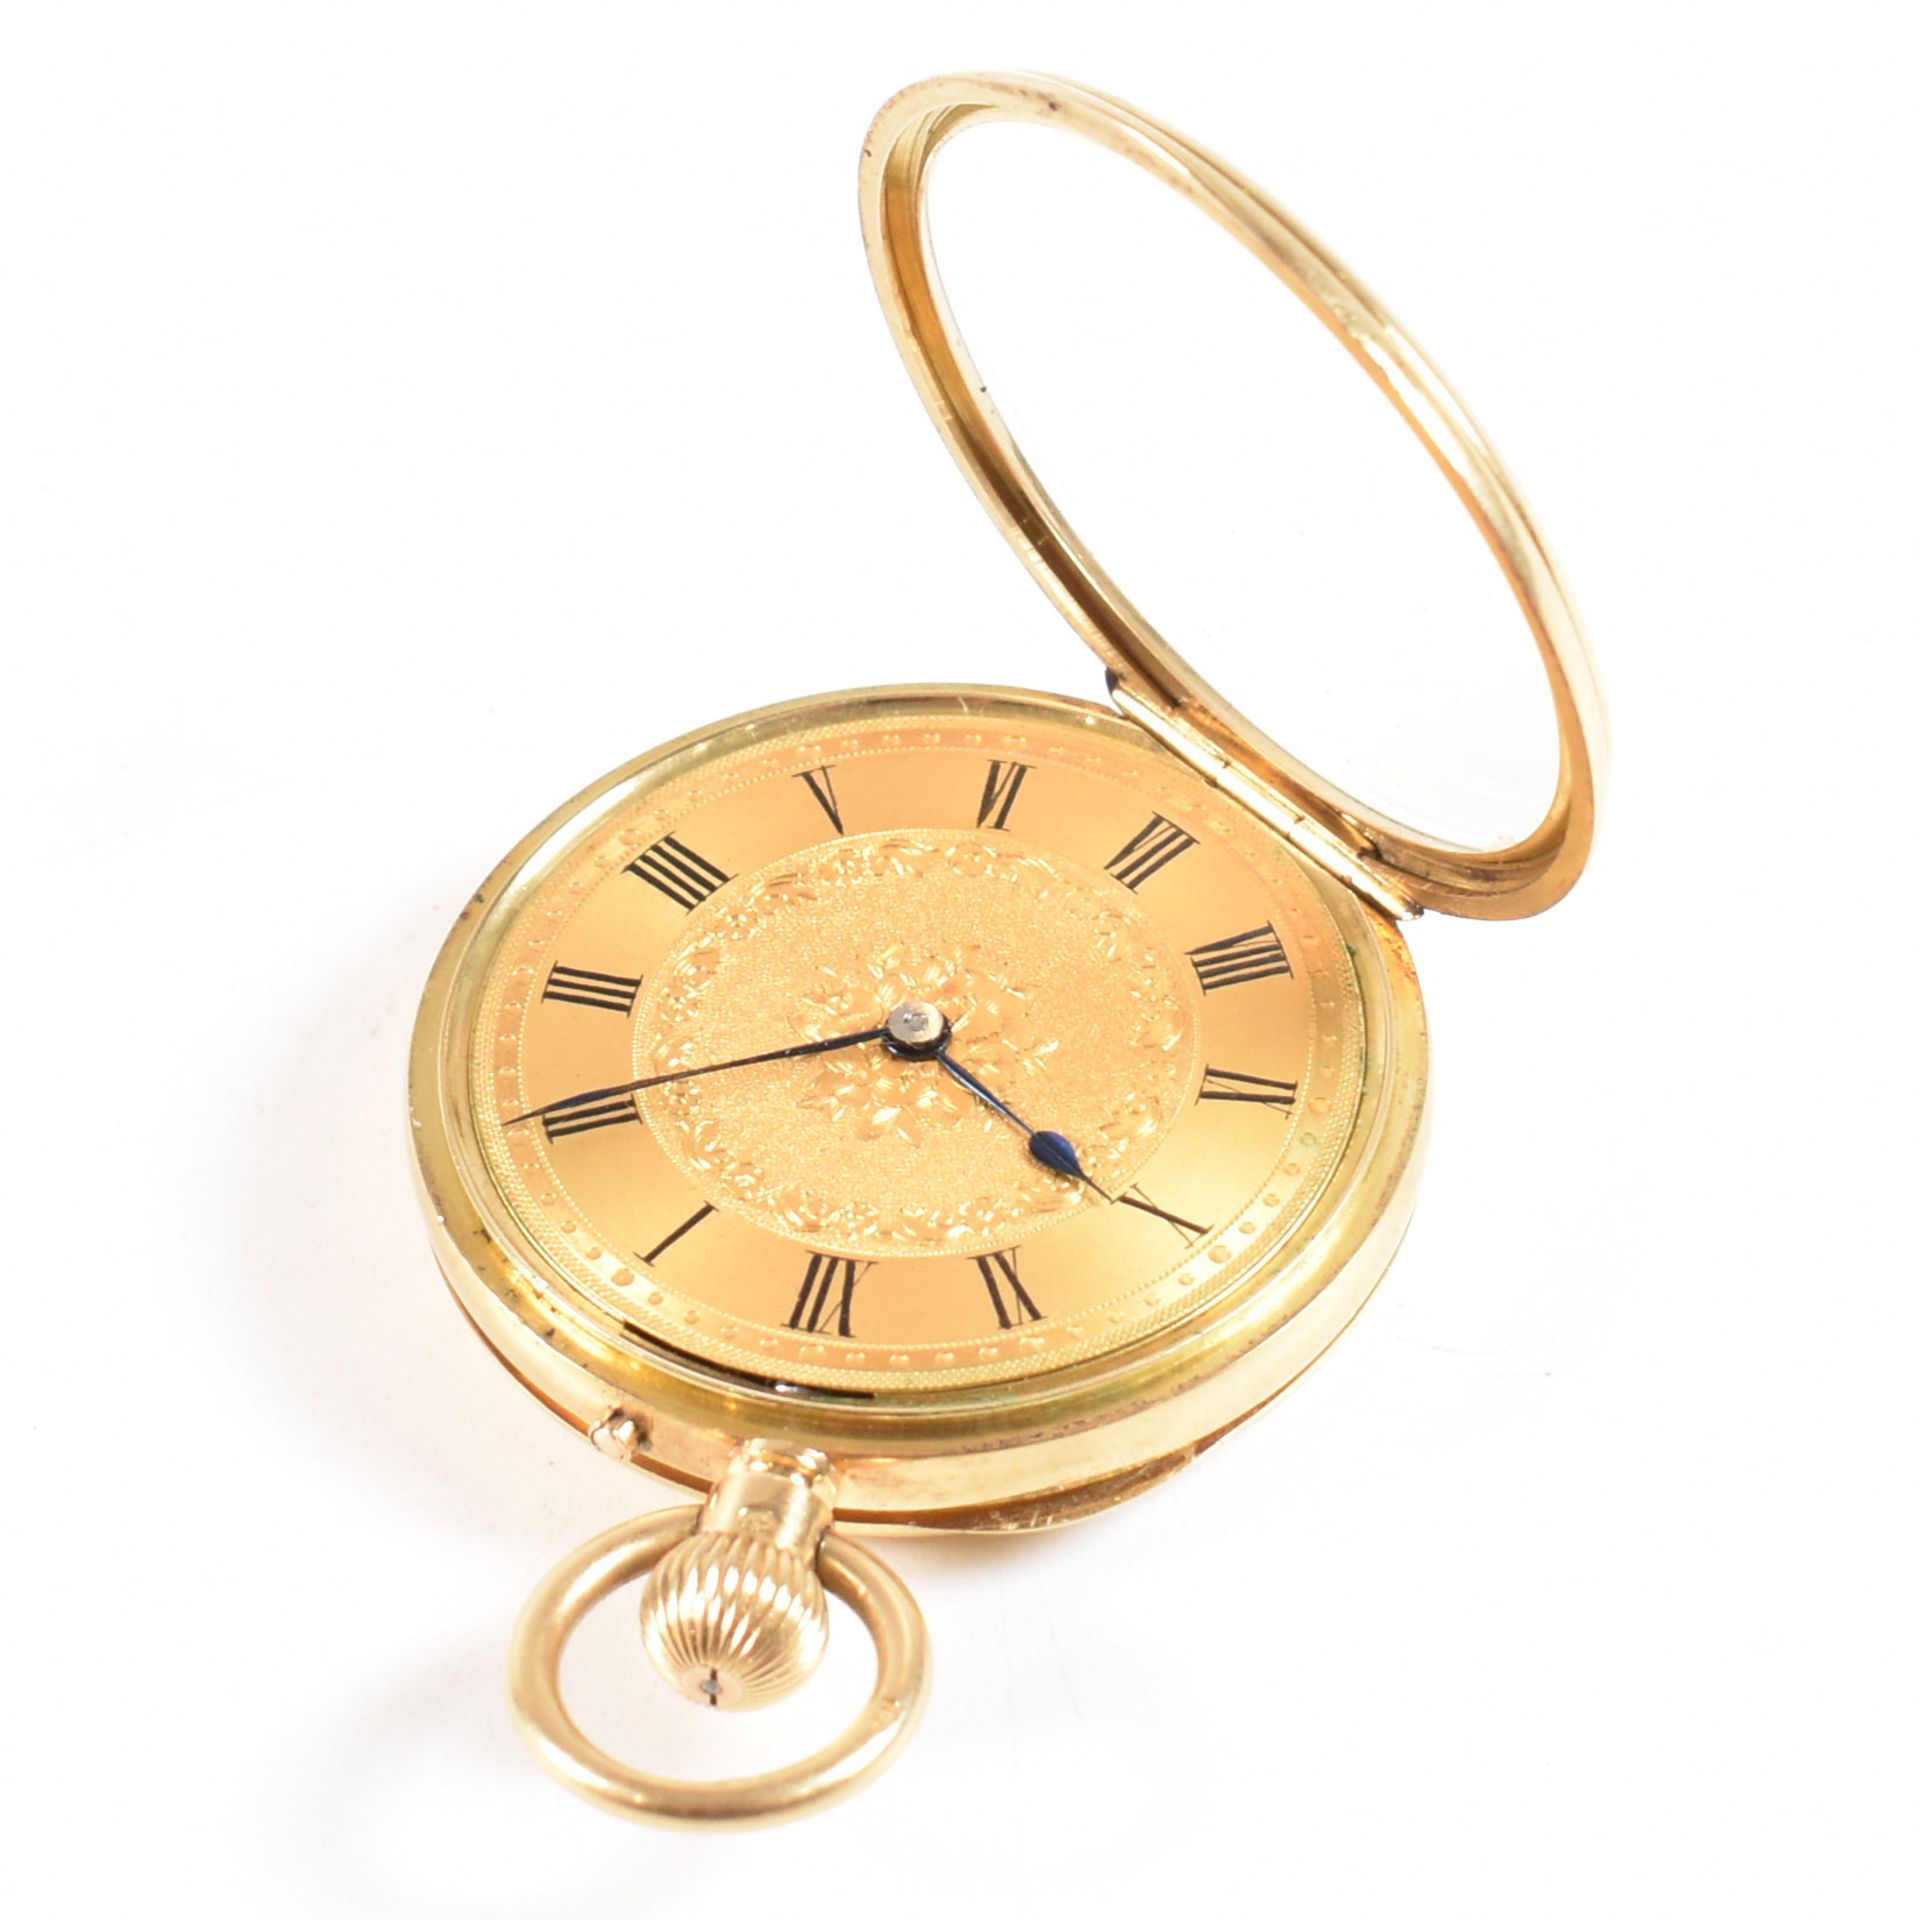 HALLMARKED 18CT GOLD OPEN FACE POCKET WATCH. - Image 6 of 7